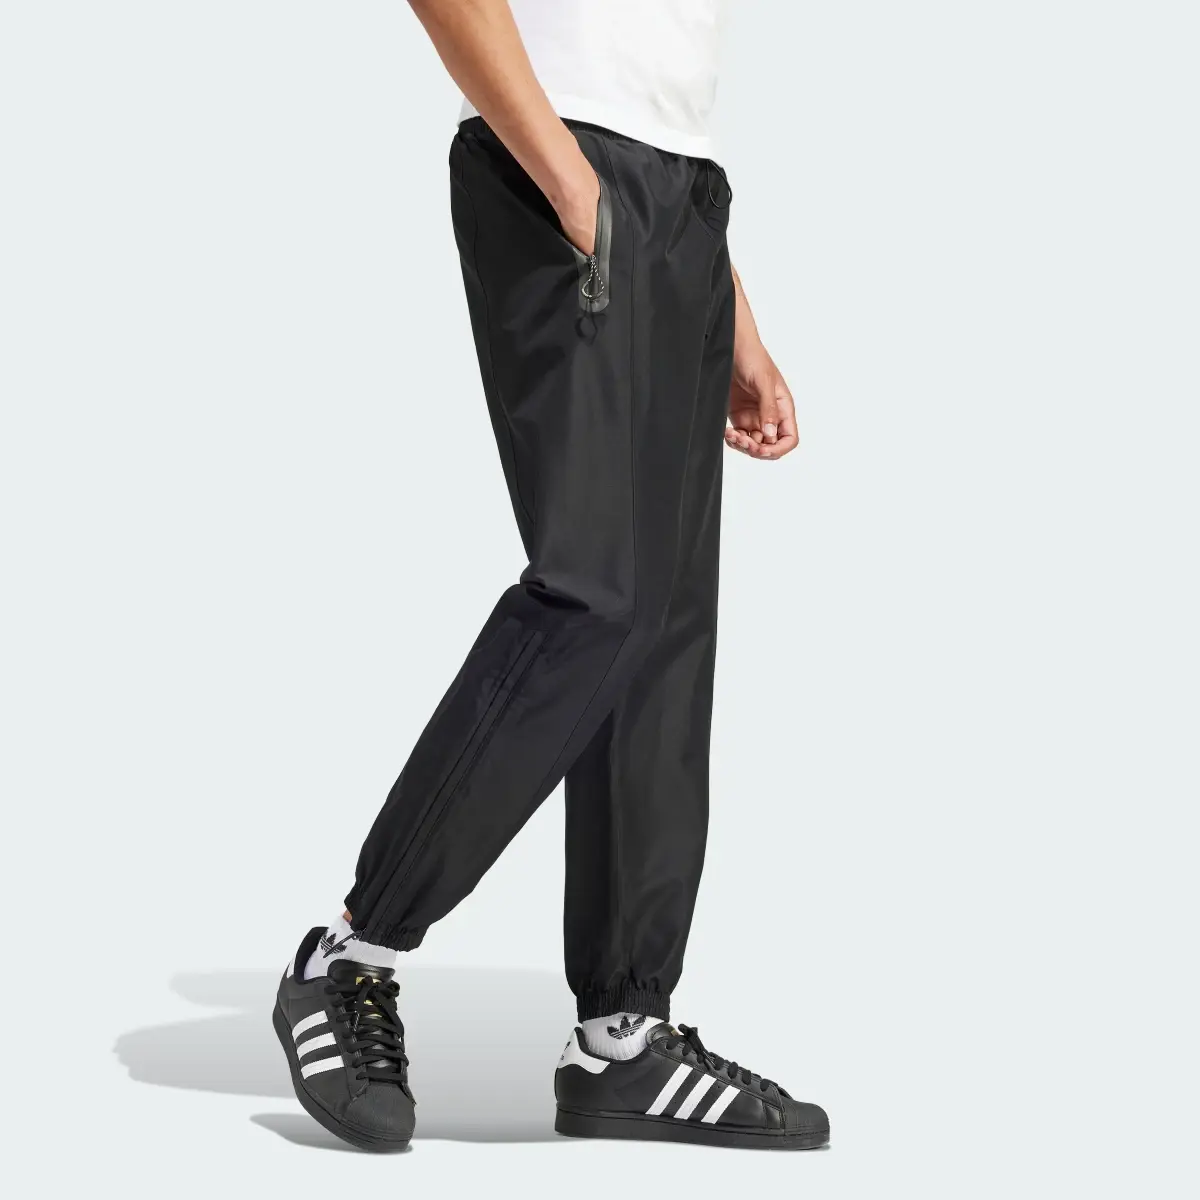 Adidas Doubleknit Tracksuit Bottoms and Overlay. 3